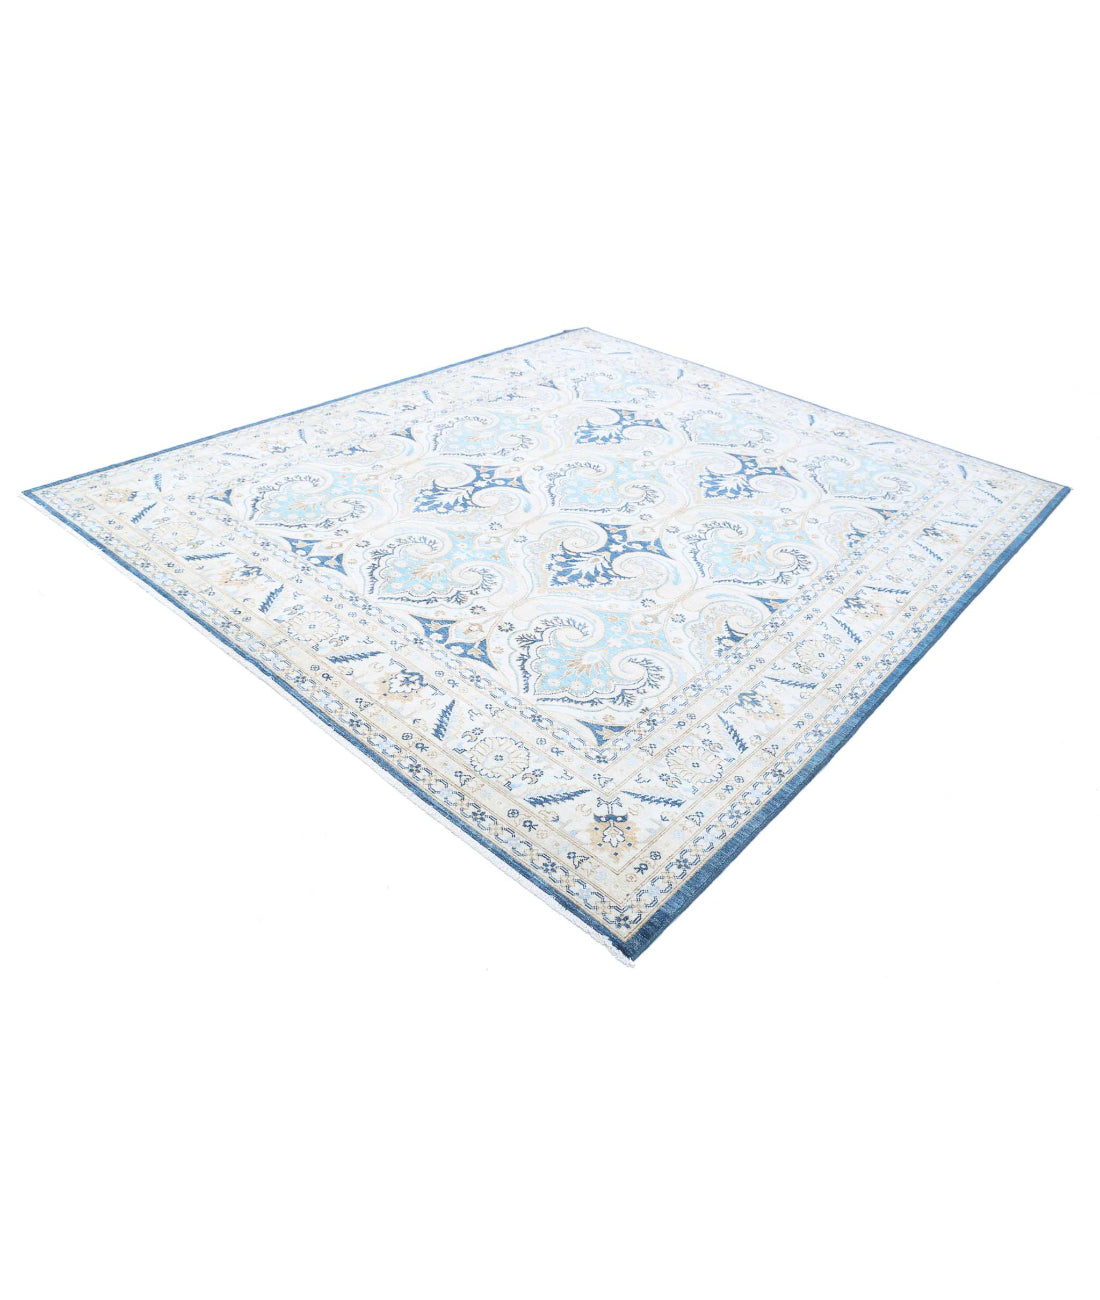 Ziegler 8'2'' X 9'5'' Hand-Knotted Wool Rug 8'2'' x 9'5'' (245 X 283) / Blue / Ivory